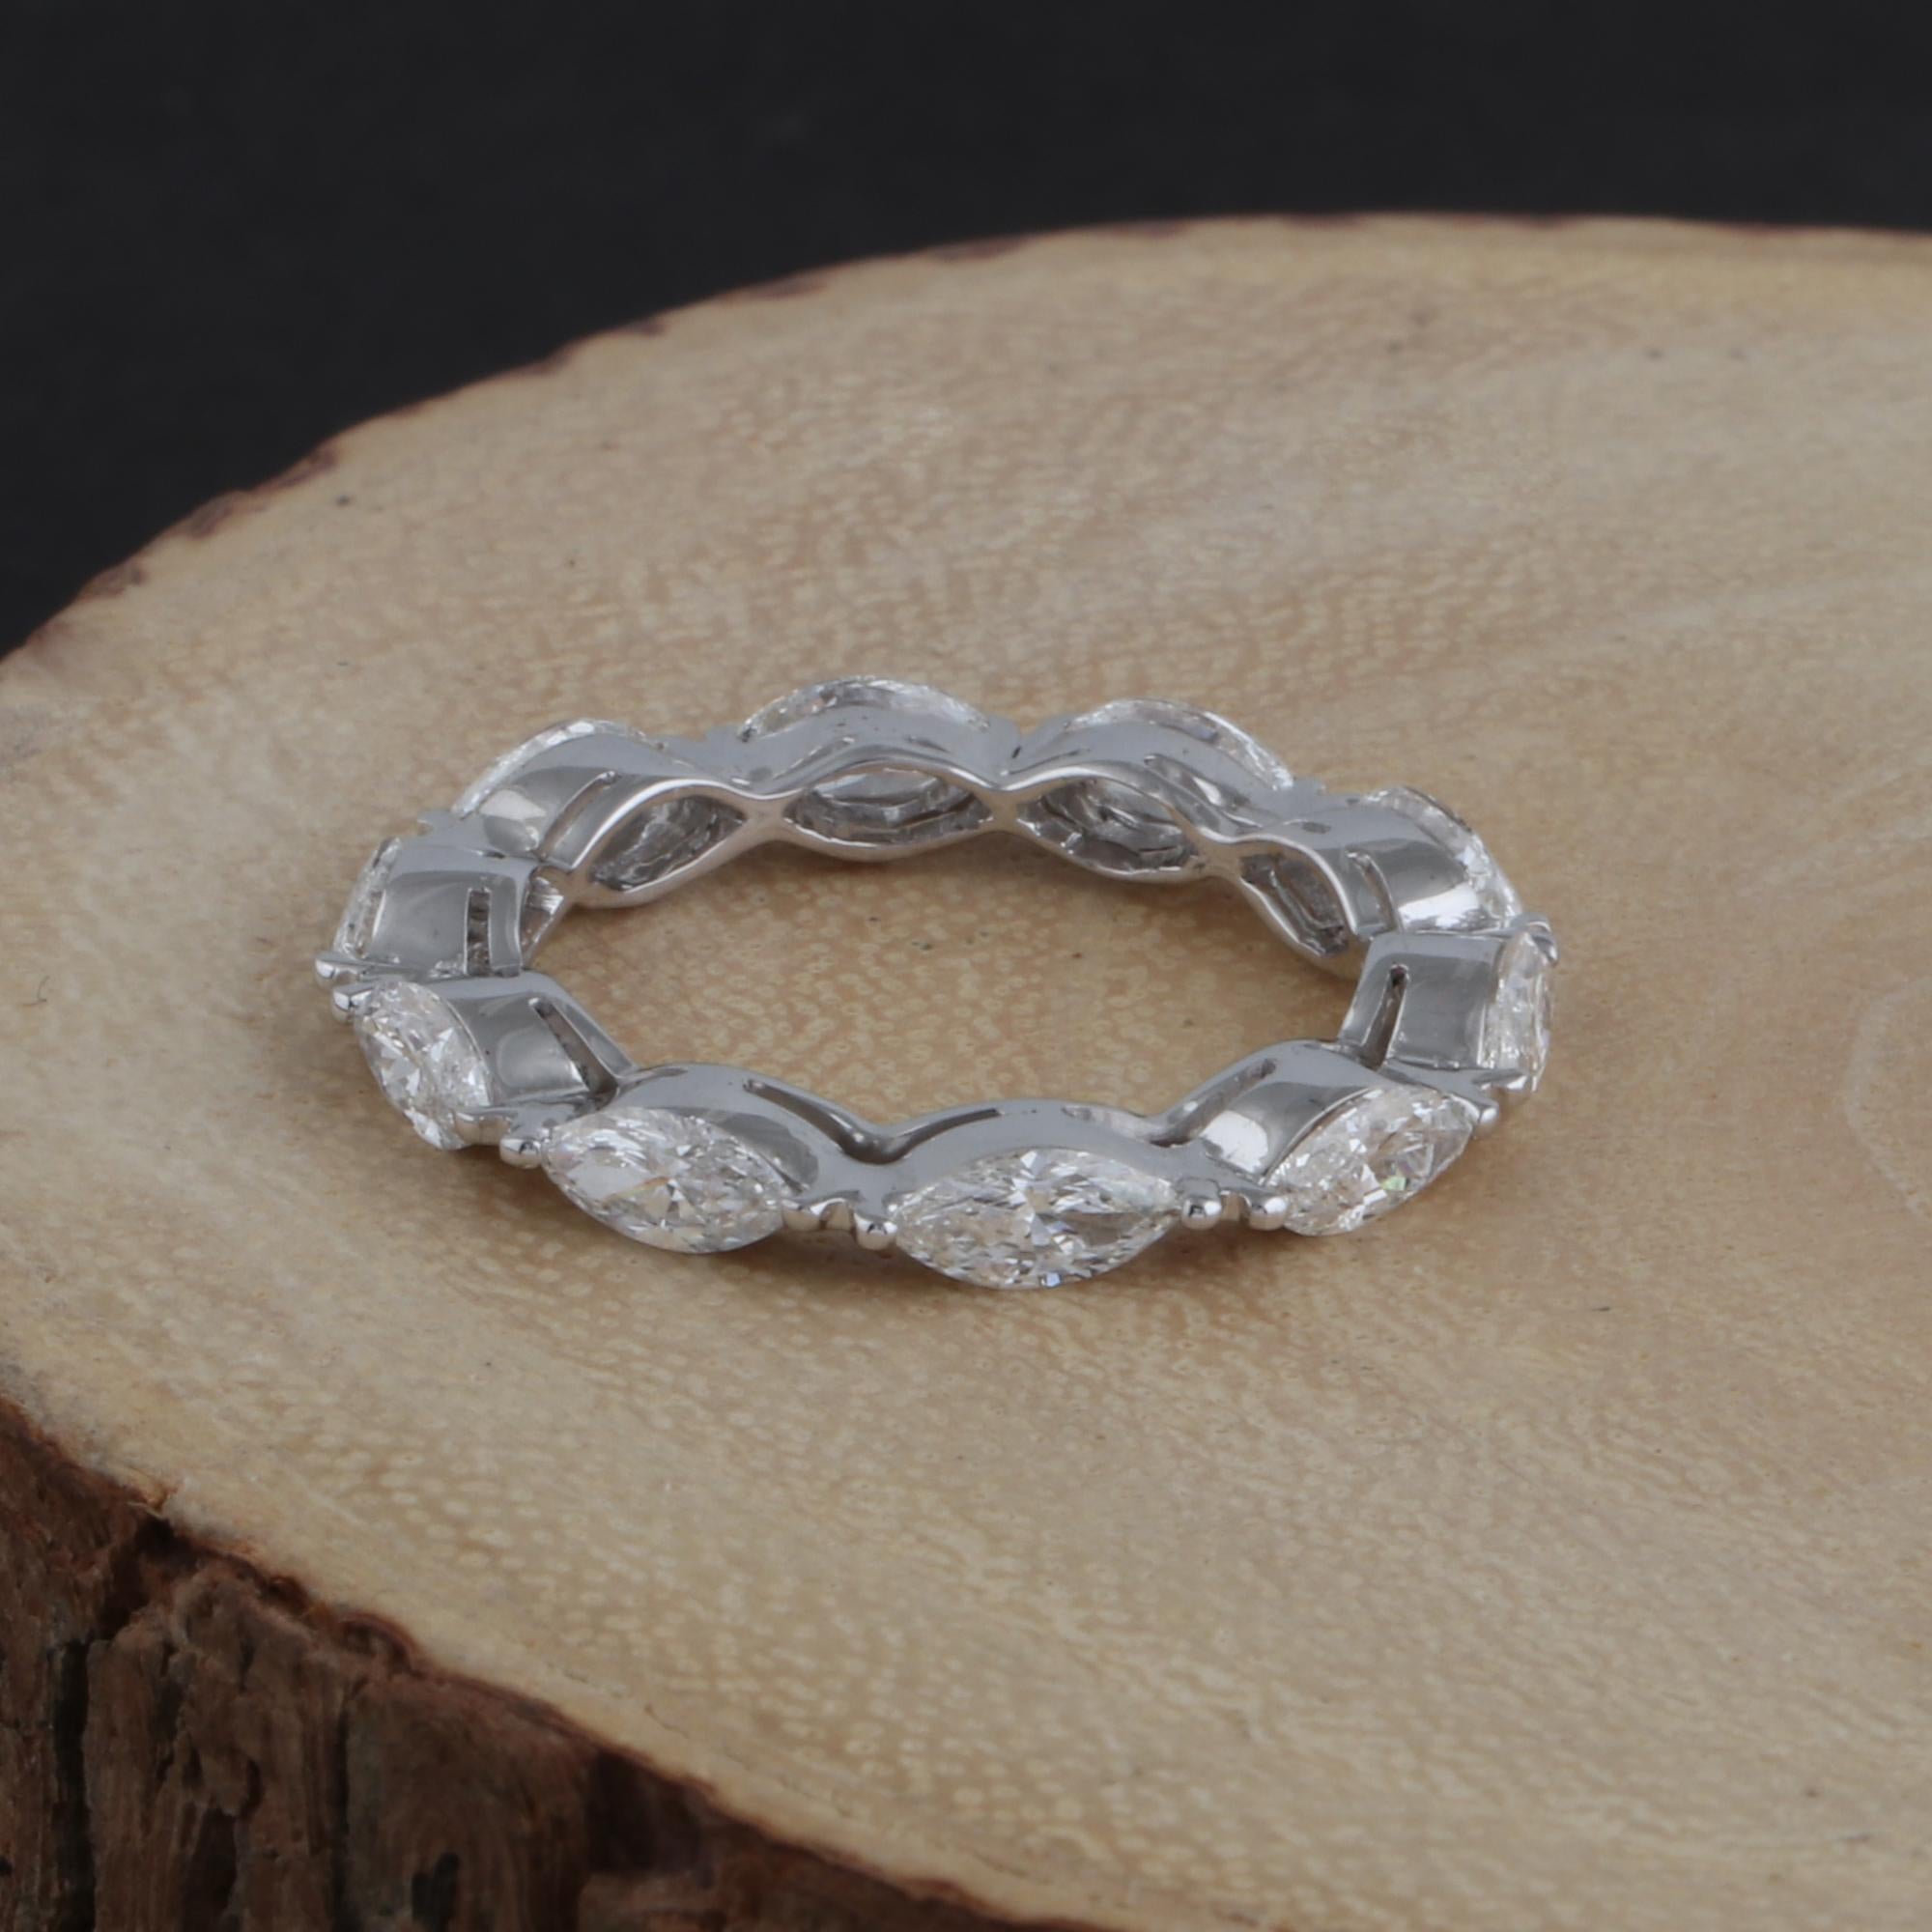 For Sale:  1.9 Carat SI Clarity HI Color Marquise Diamond Eternity Band Ring 18k White Gold 3